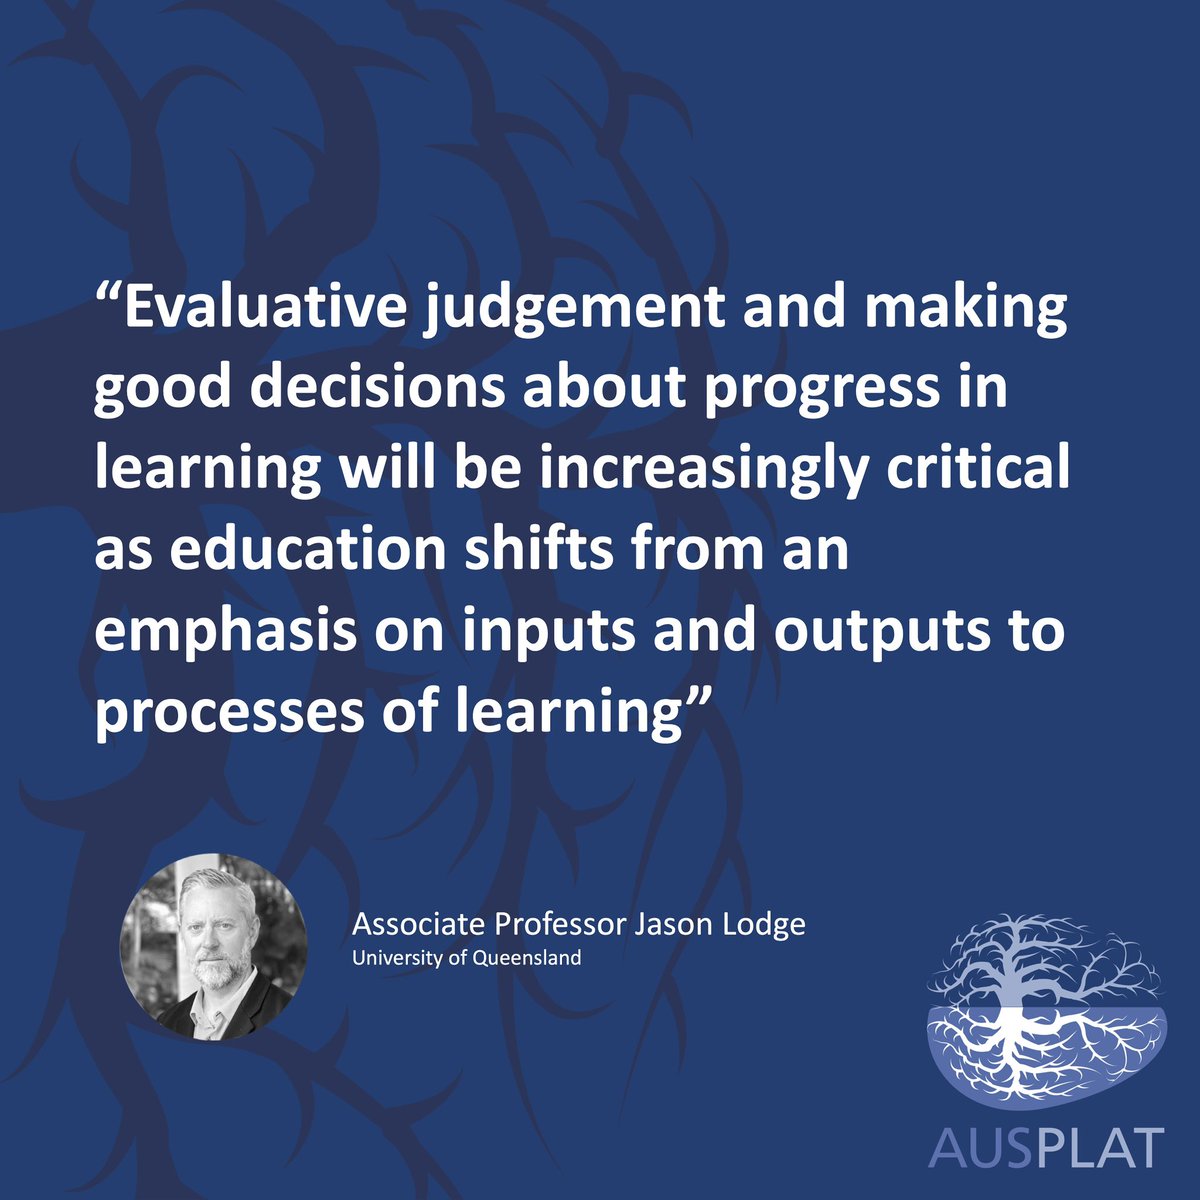 On Day 2 of @ausplat our third and final keynote speaker is presenting on self-regulated learning in the age of AI!

We welcome the insights of Assoc. Prof @jasonmlodge on this timely topic!! 

Register NOW to join us in Hobart or online, September 8-10!

psychology.org.au/event/23950